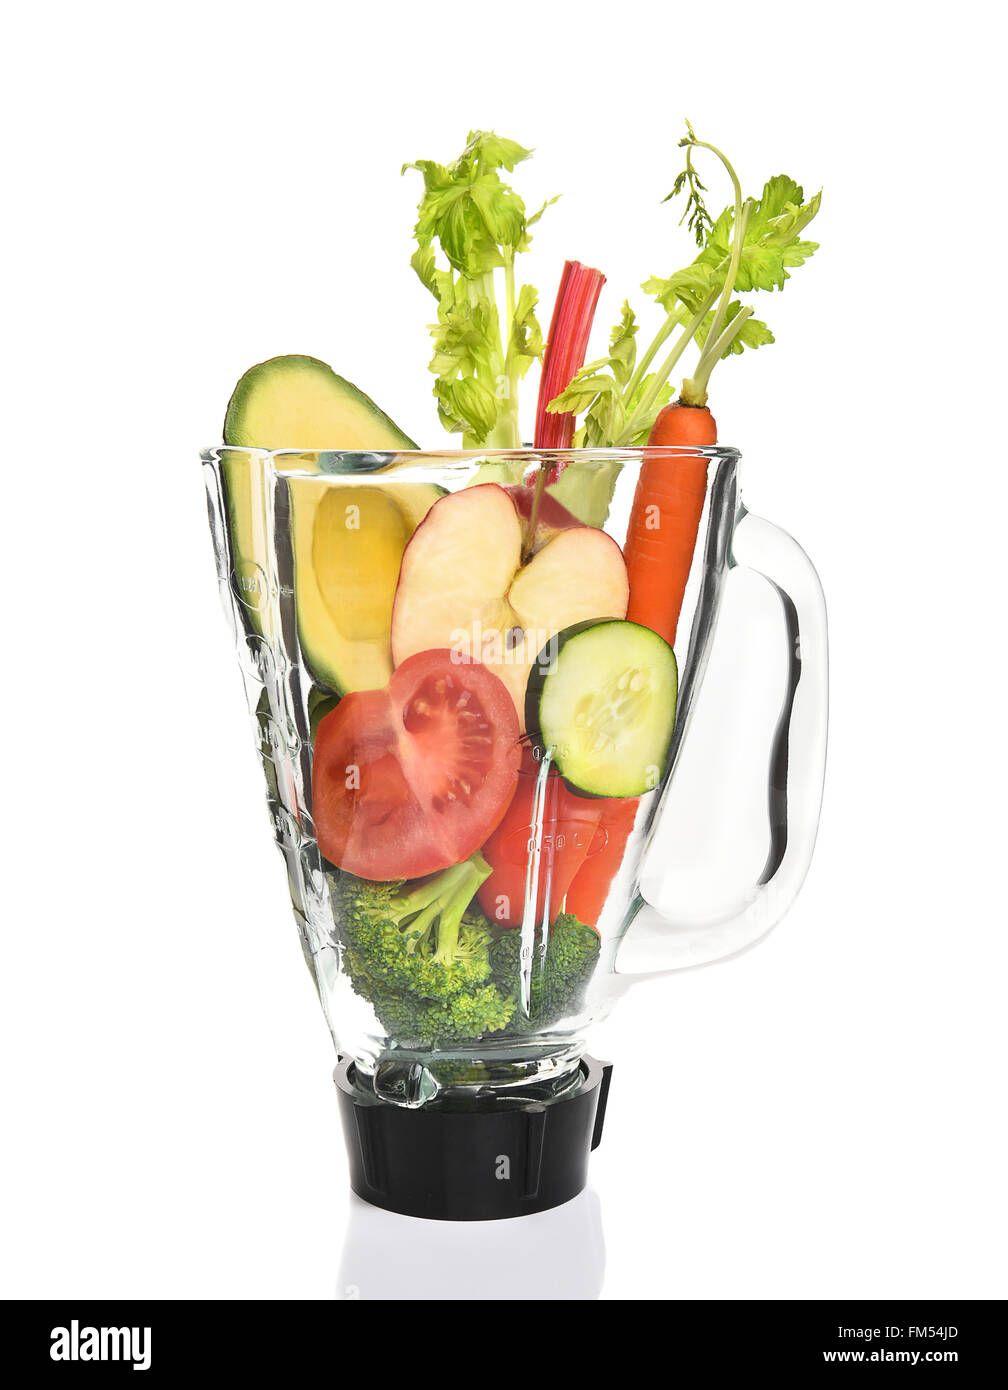 Vegetables in a blender ready for juicing. Healthy eating concept. Stock Photo